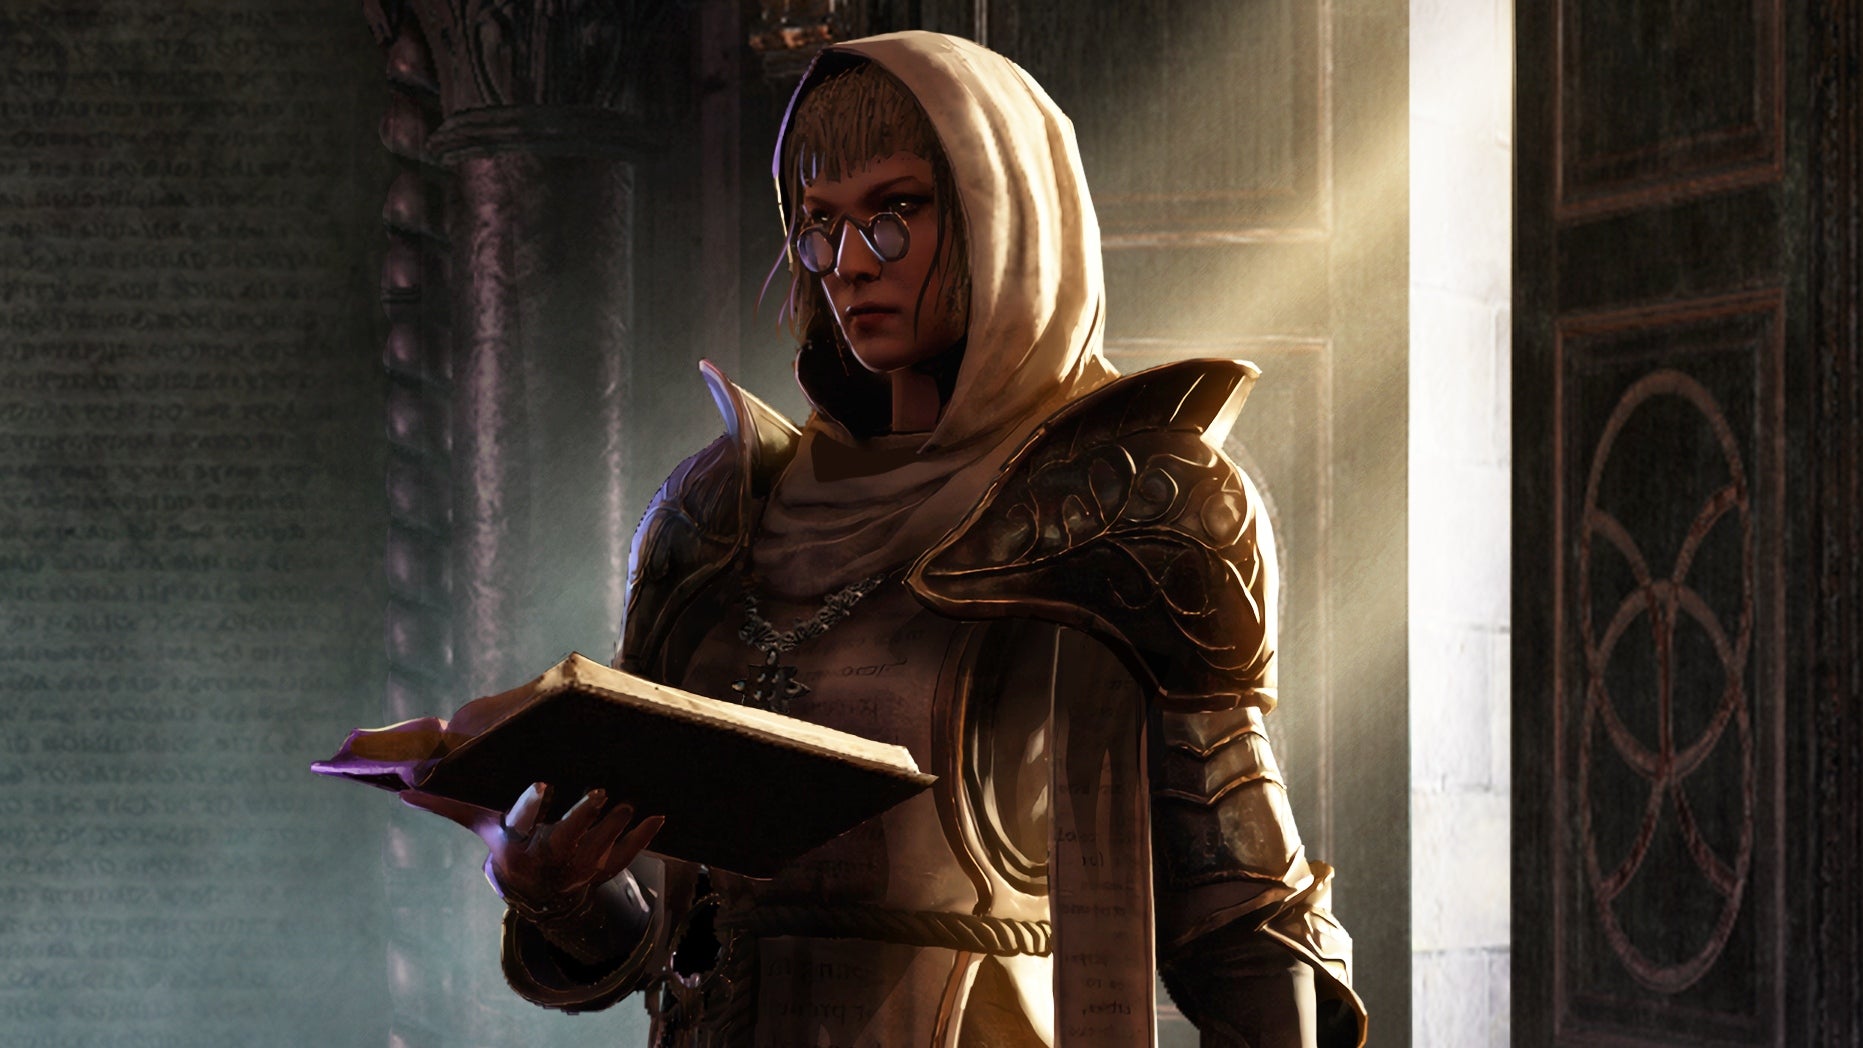 Key art from Path Of Exile's The Forbidden Sanctum expansion showing a robed figure standing in front of a doorway and holding a book